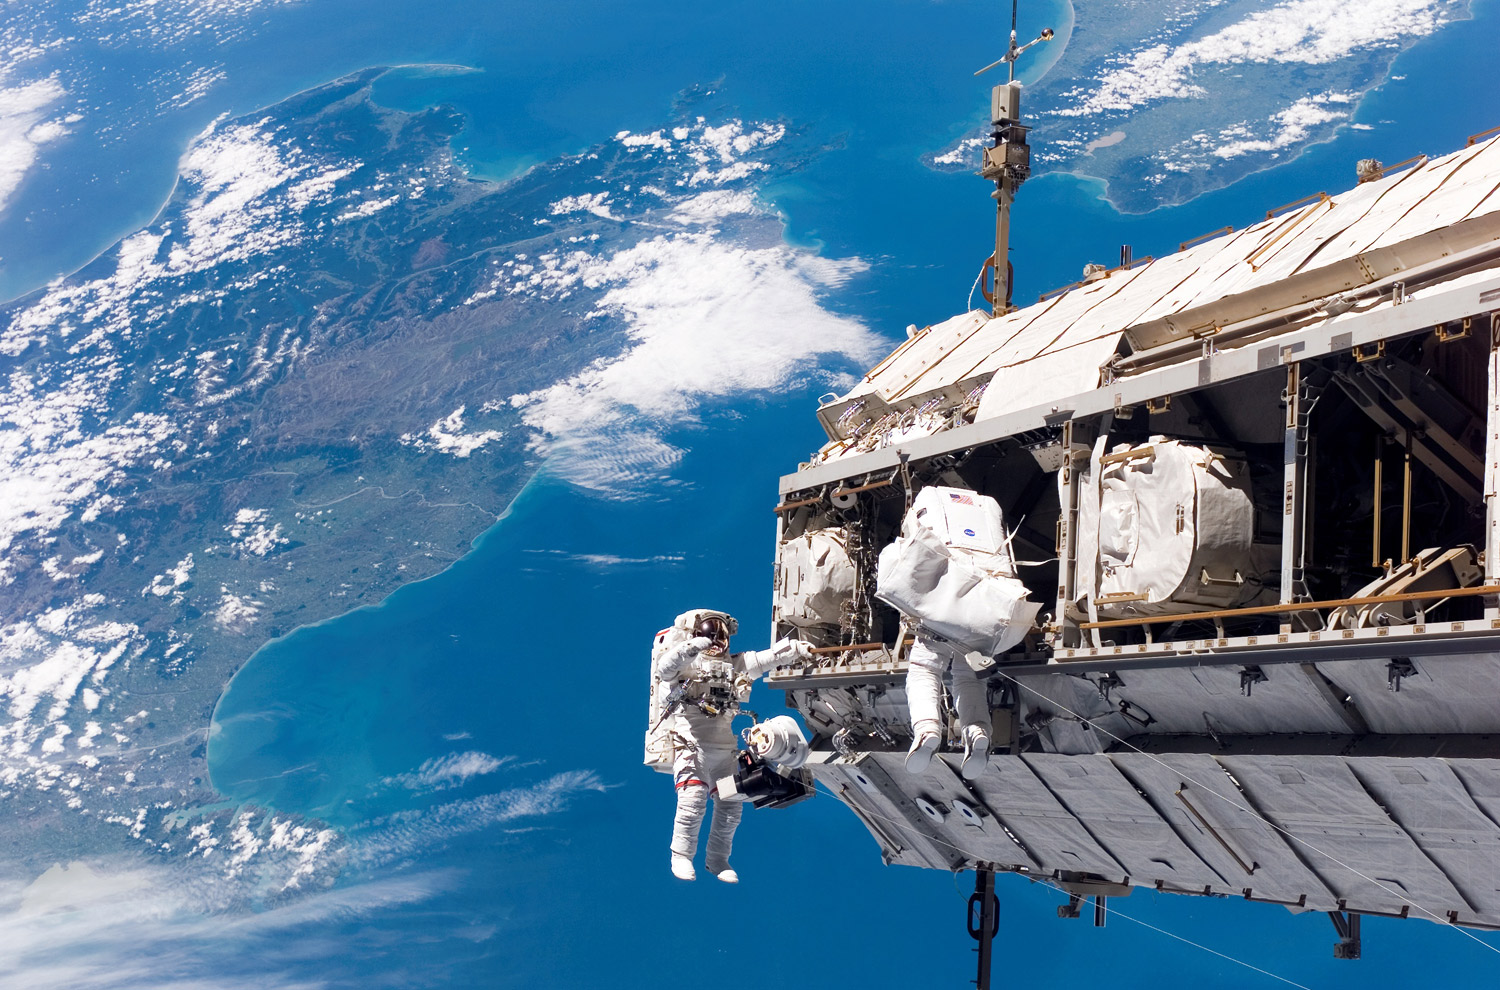 Astronaut Robert L. Curbeam Jr., left, and European Space Agency astronaut Christer Fuglesang participate in an extravehicular activity (space walk) as construction continues on the International Space Station on December 12, 2006. New Zealand and Cook Strait in the Pacific Ocean is visible in the background.